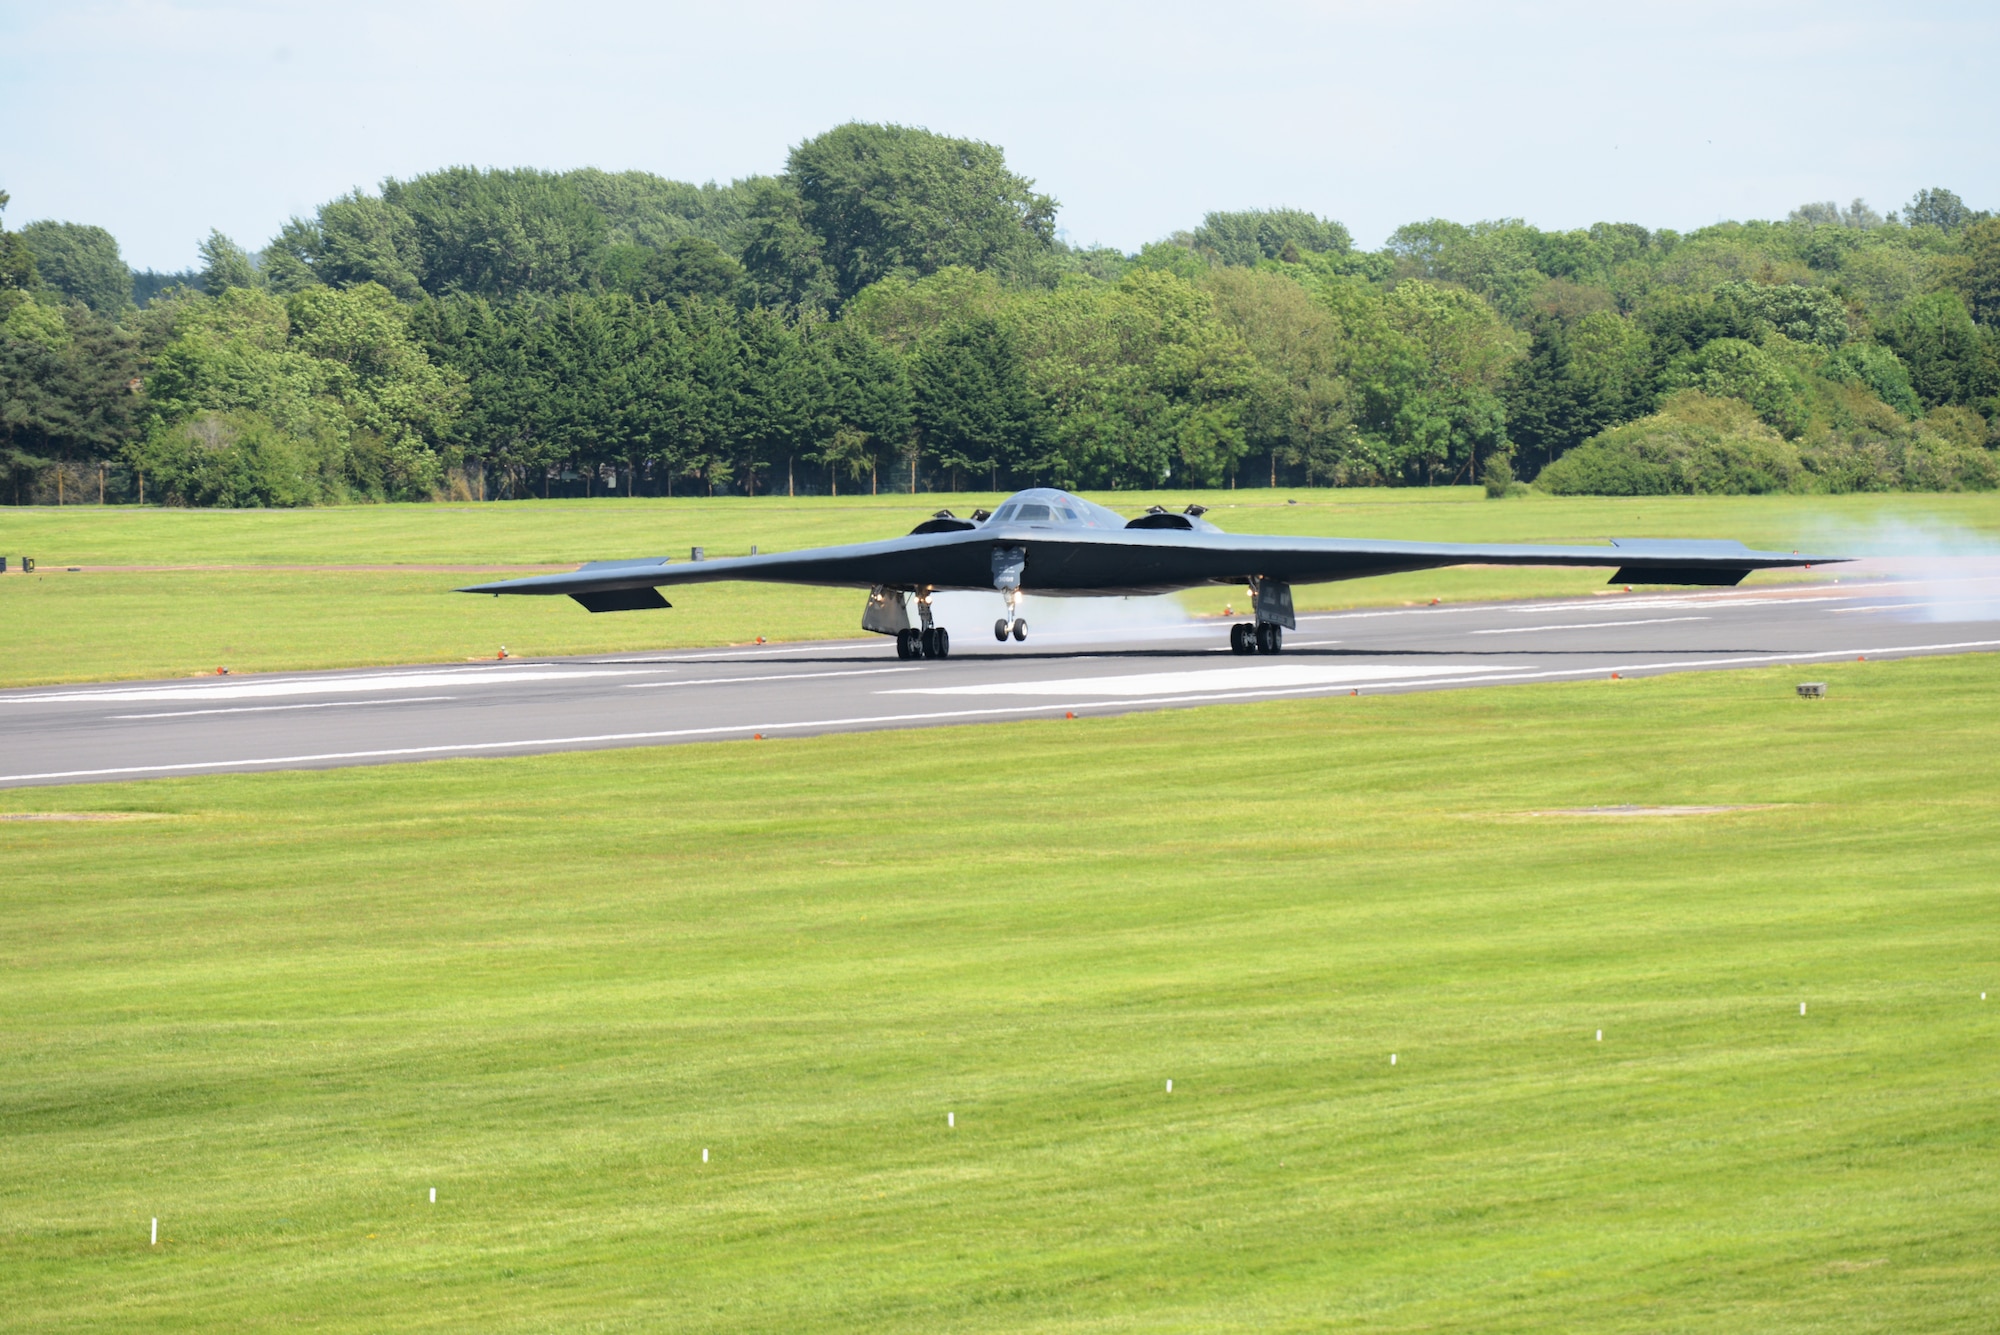 A B-2 Spirit from the 509th Bomb Wing, Whiteman Air Force Base, Mo., lands on the runway at RAF Fairford, England, June 8, 2014. The B-2’s low-observable, or "stealth," characteristics give it the unique ability to penetrate an enemy's most sophisticated defenses and threaten its most valued, and heavily defended, targets. (U.S. Air Force photo by Tech. Sgt. Chrissy Best/Released)